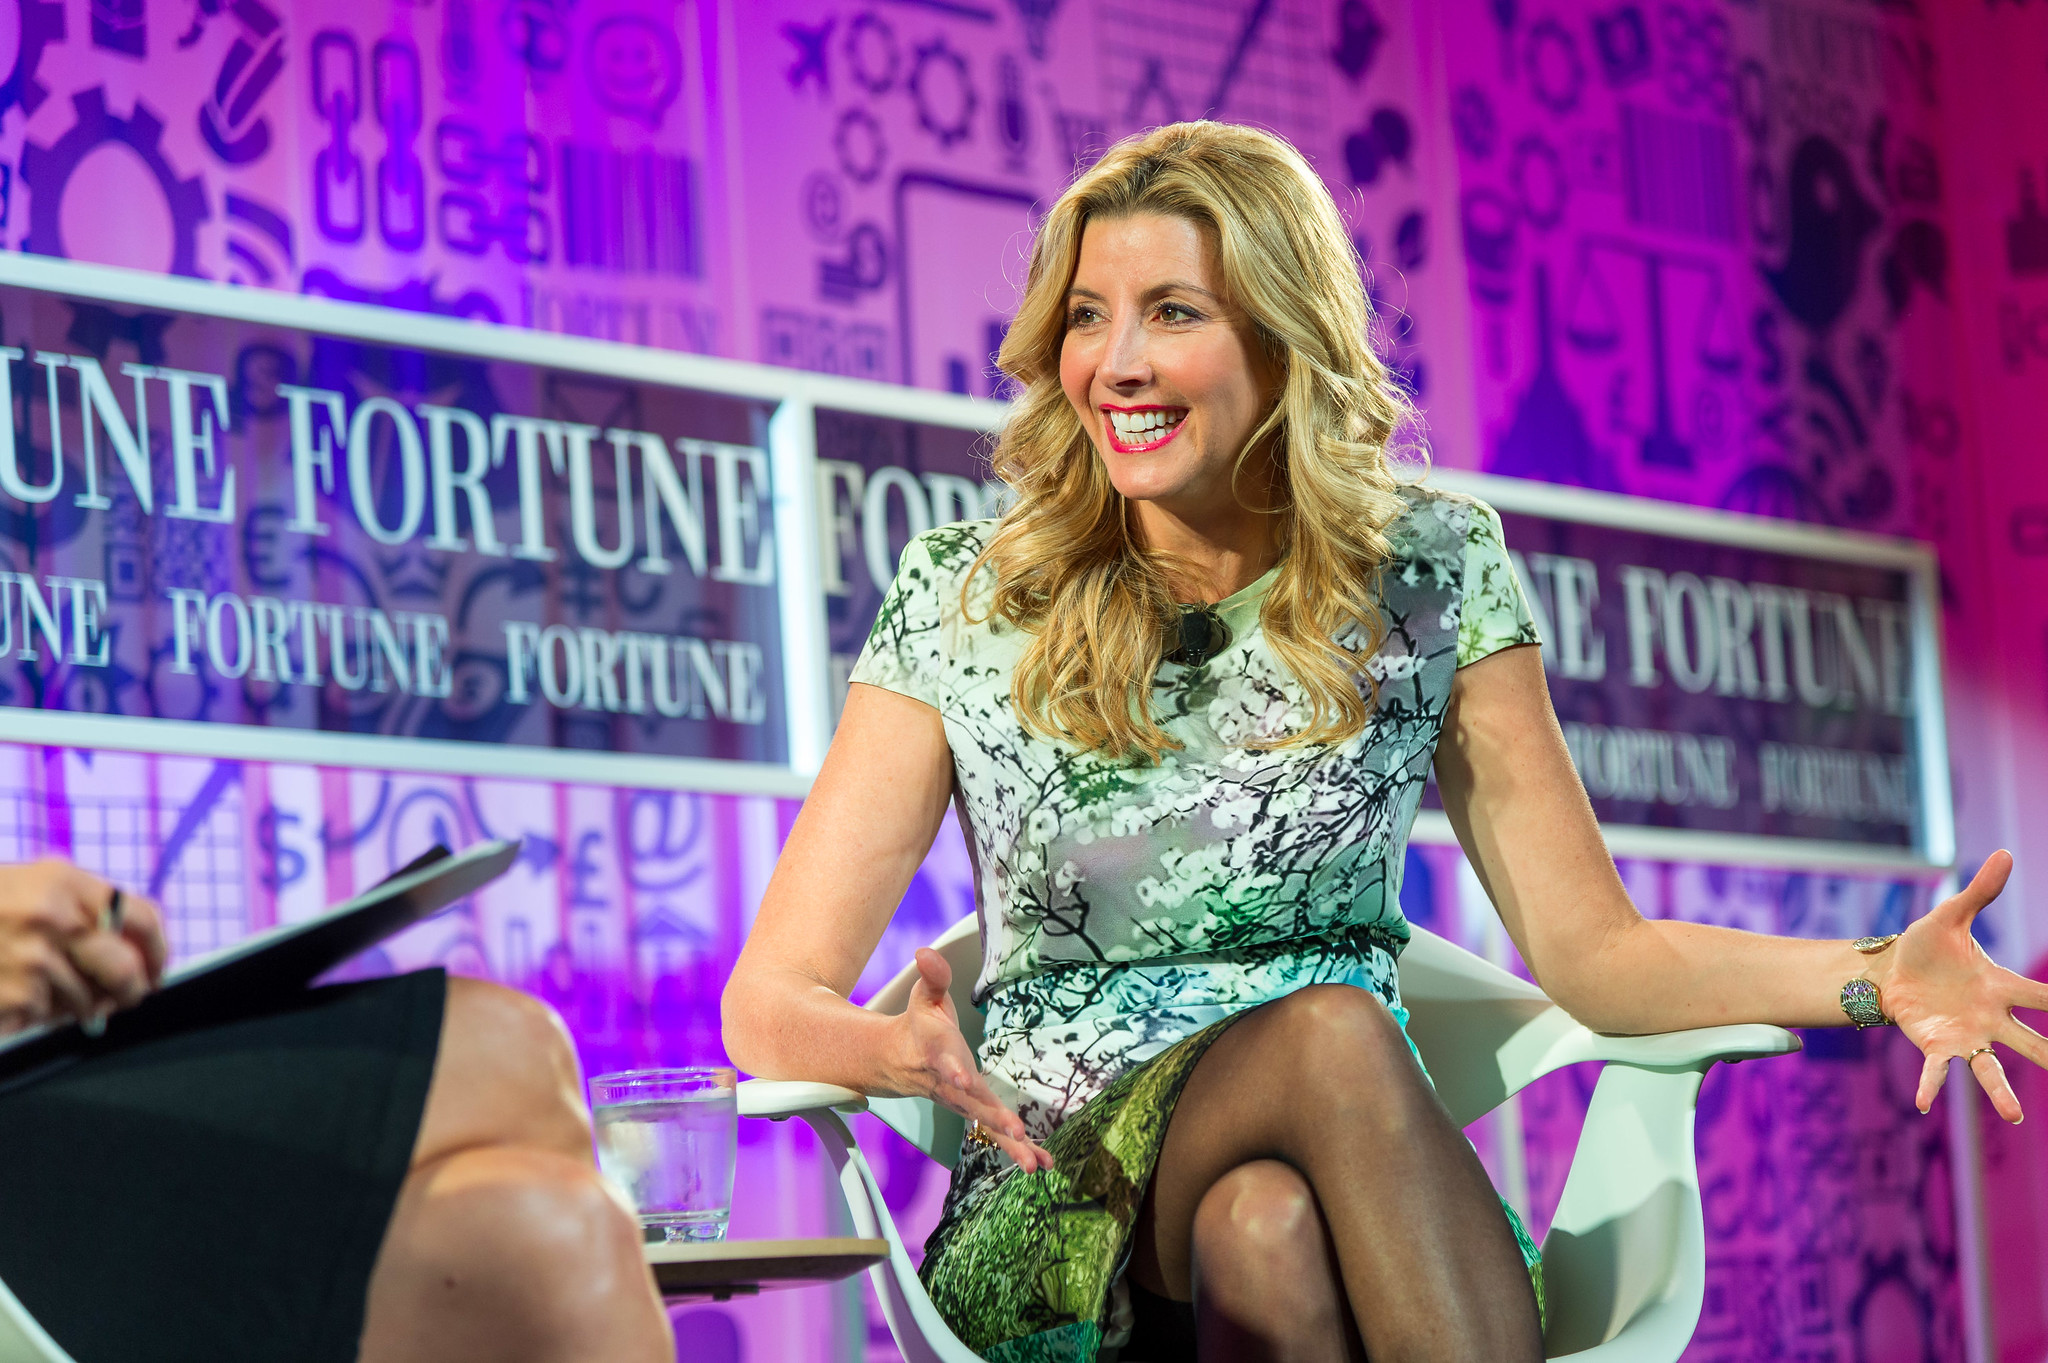 Business Story: How The Founder Of Spanx Became A Household Name